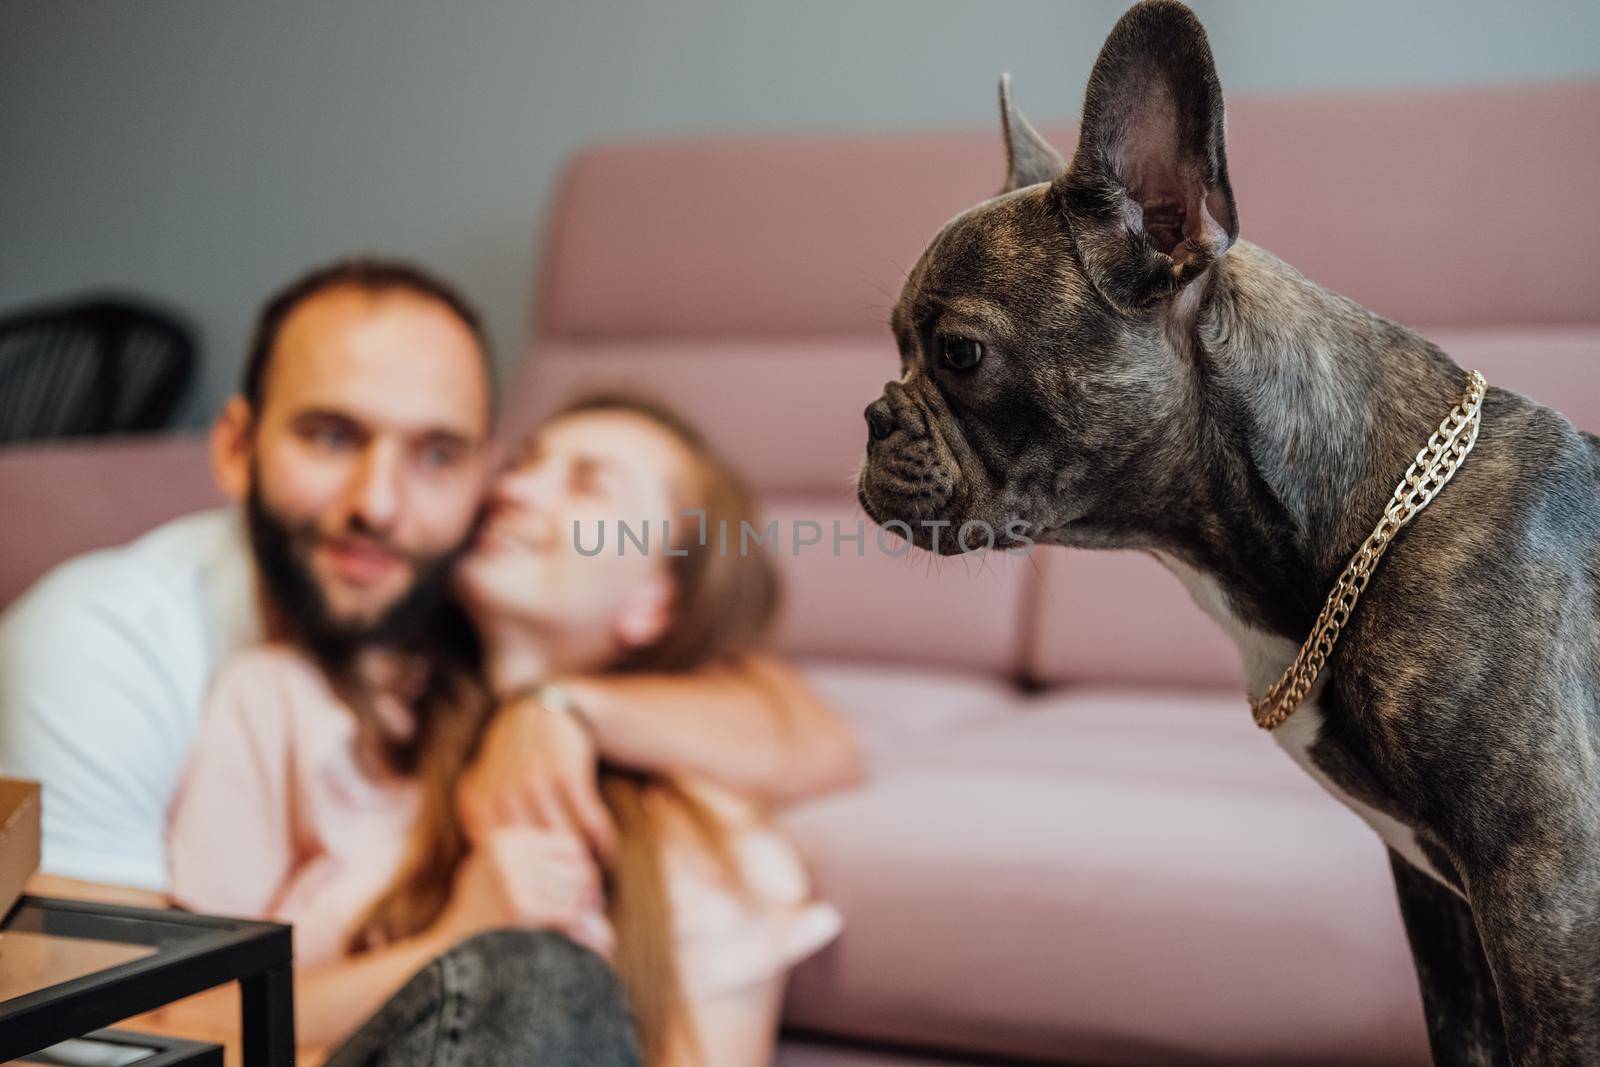 Small French Bulldog Pitifully Looking While Cheerful Man and Woman Smiling on Background